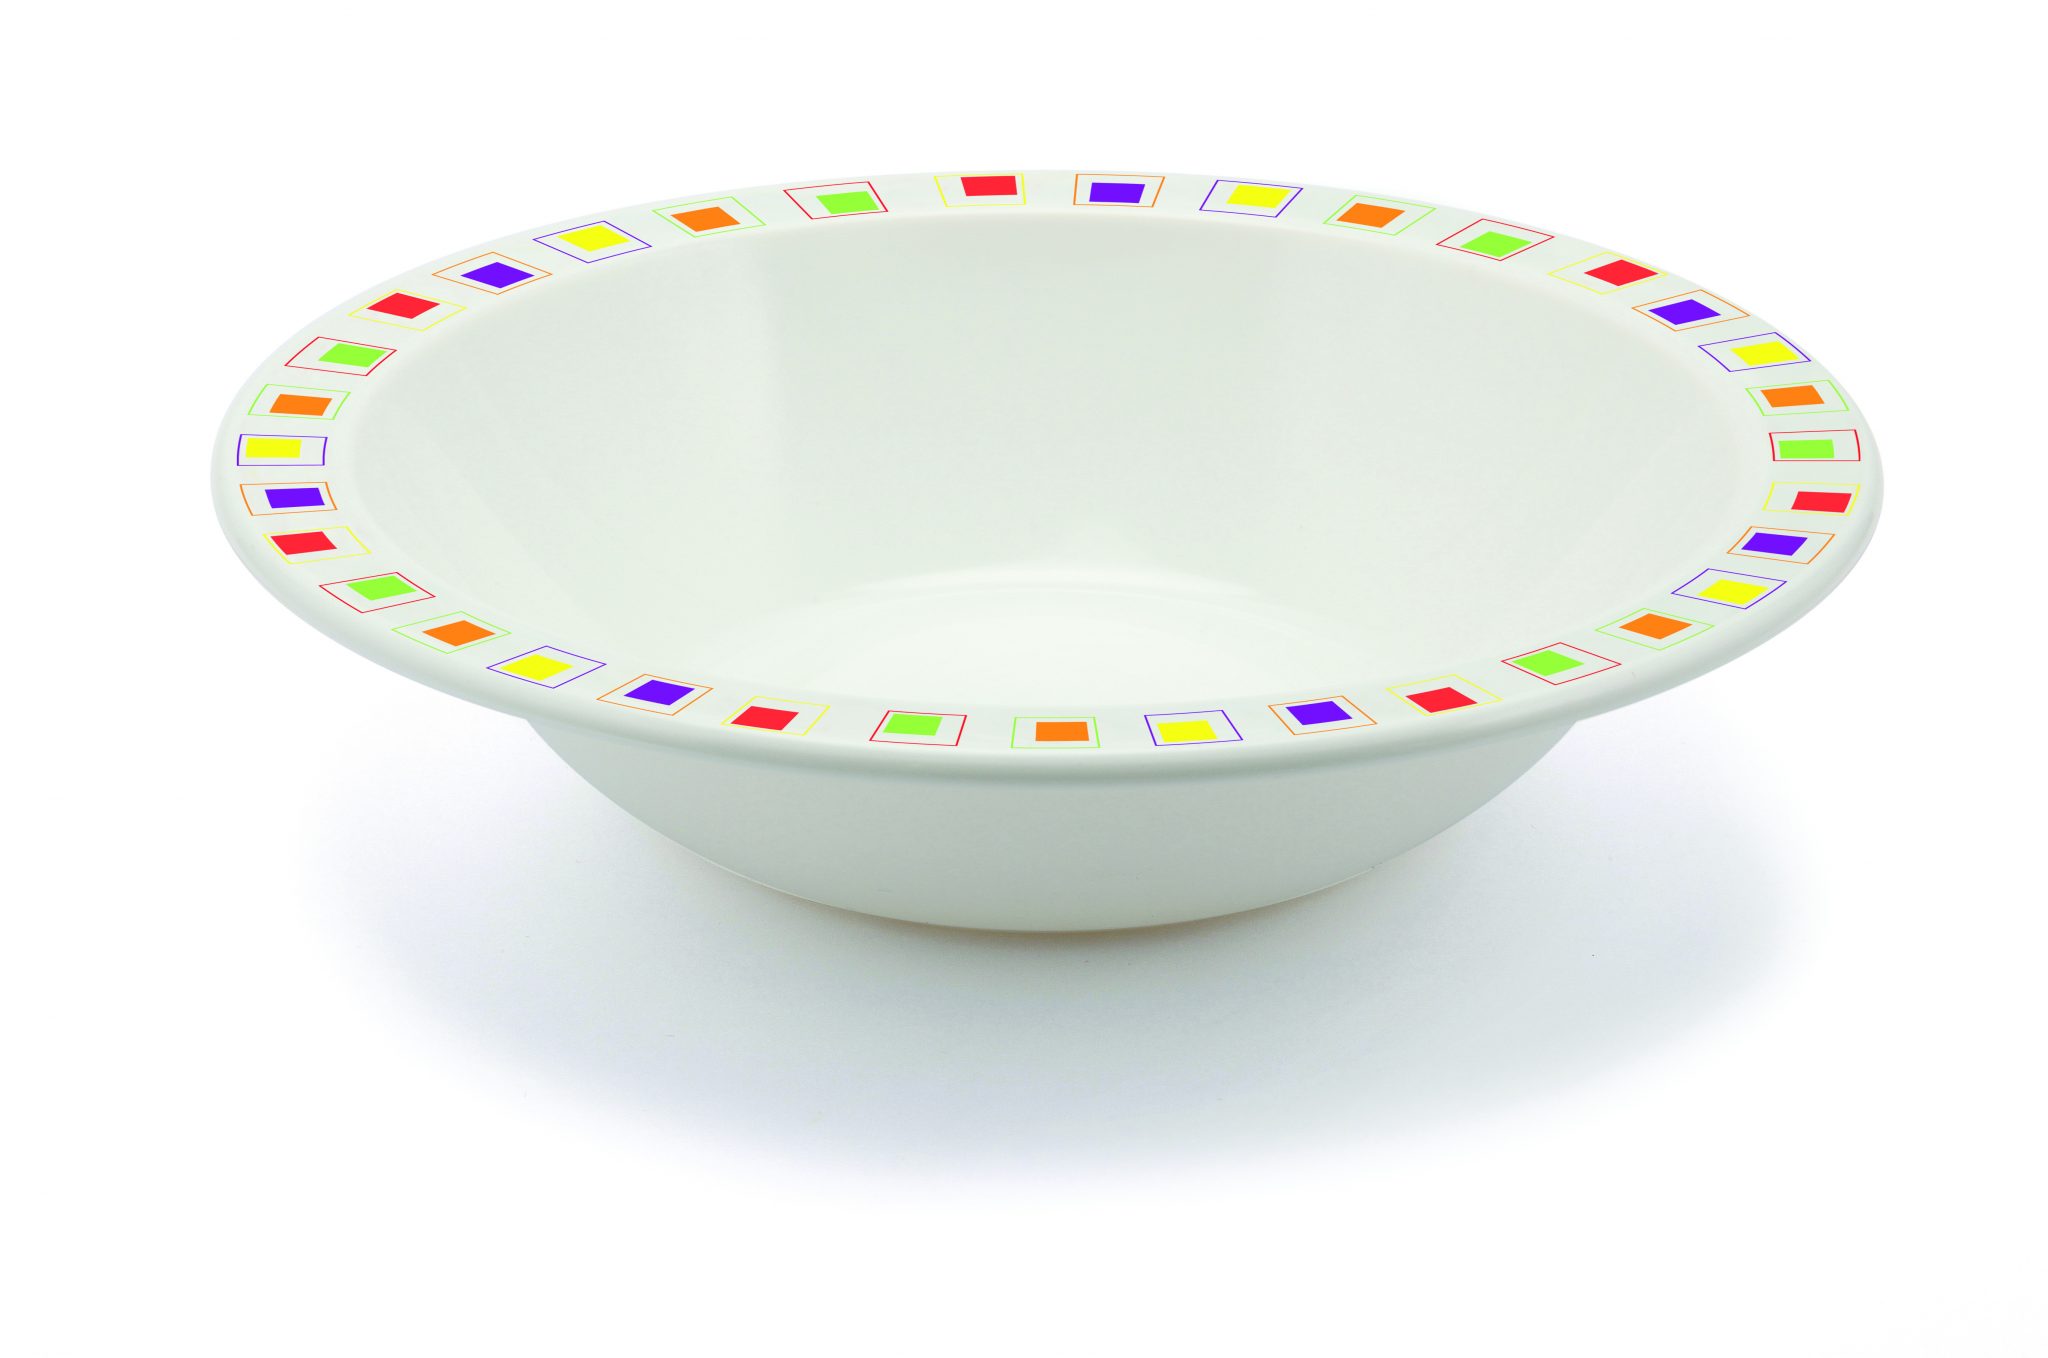 Harfield 17.3cm Polycarbonate Rimmed Patterned Bowl Multicoloured Abstract Squares Pack of 4 